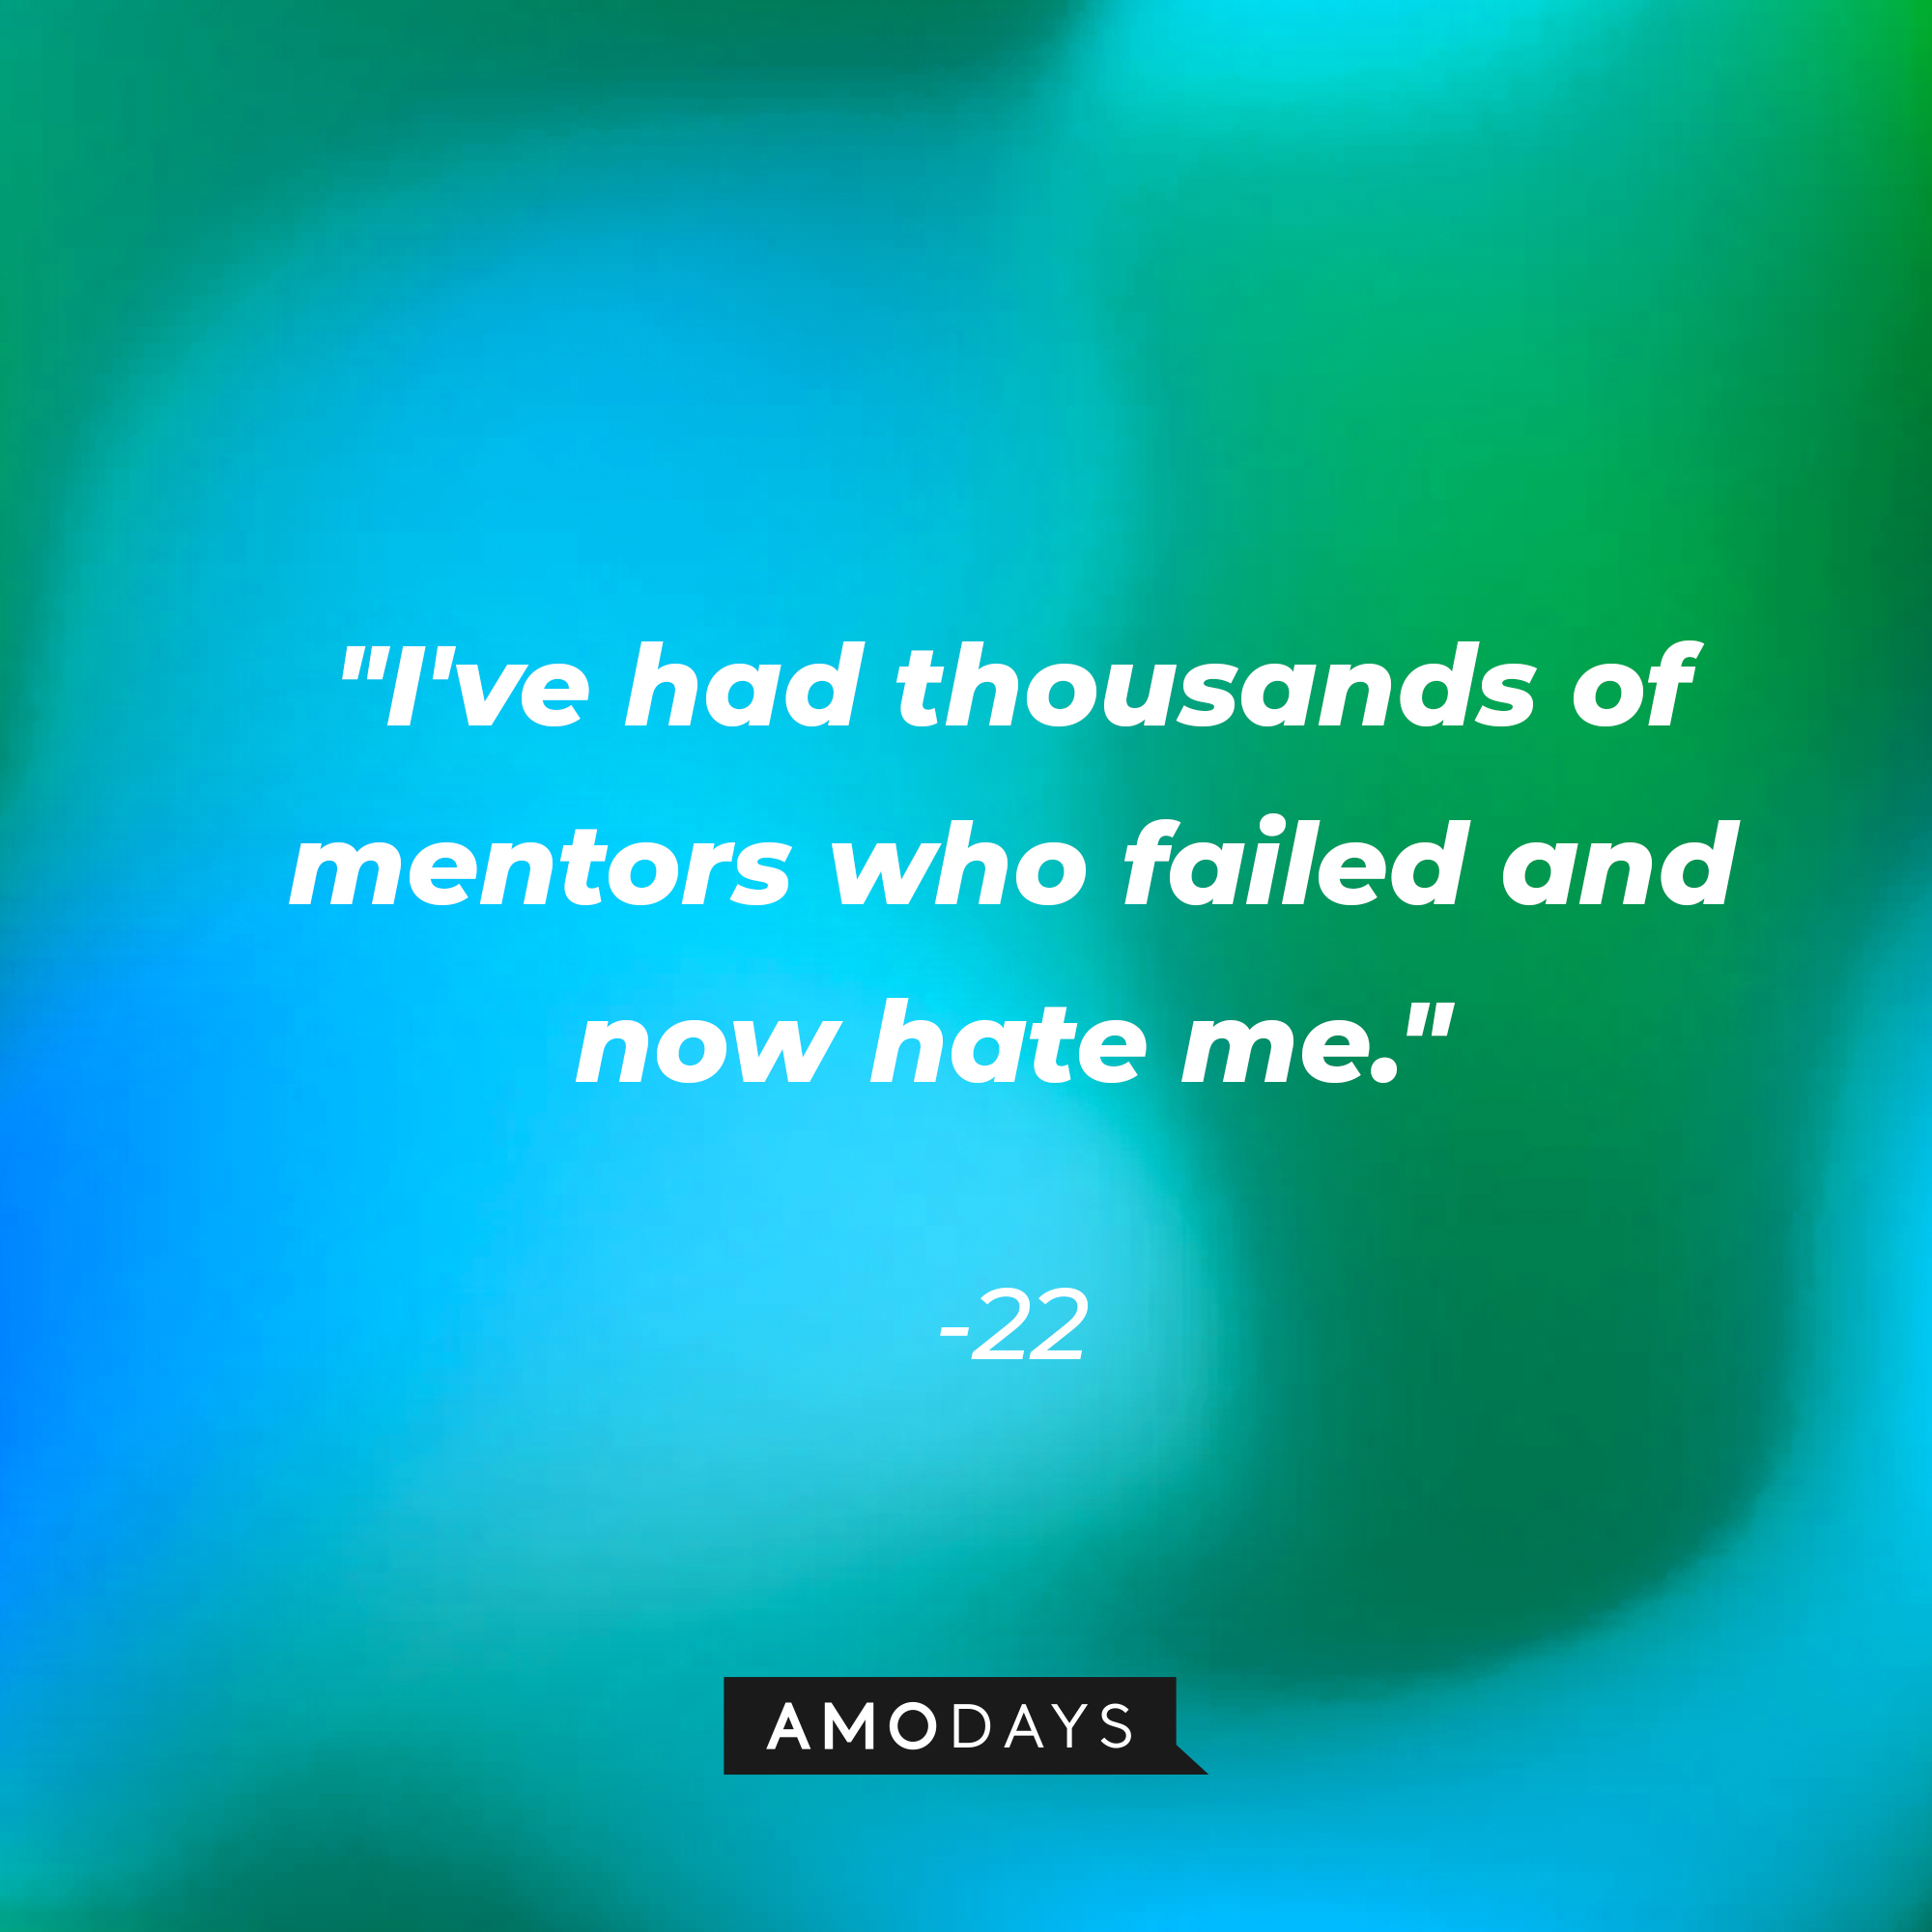 22's quote: "I've had thousands of mentors who failed and now hate me." | Source: youtube.com/pixar